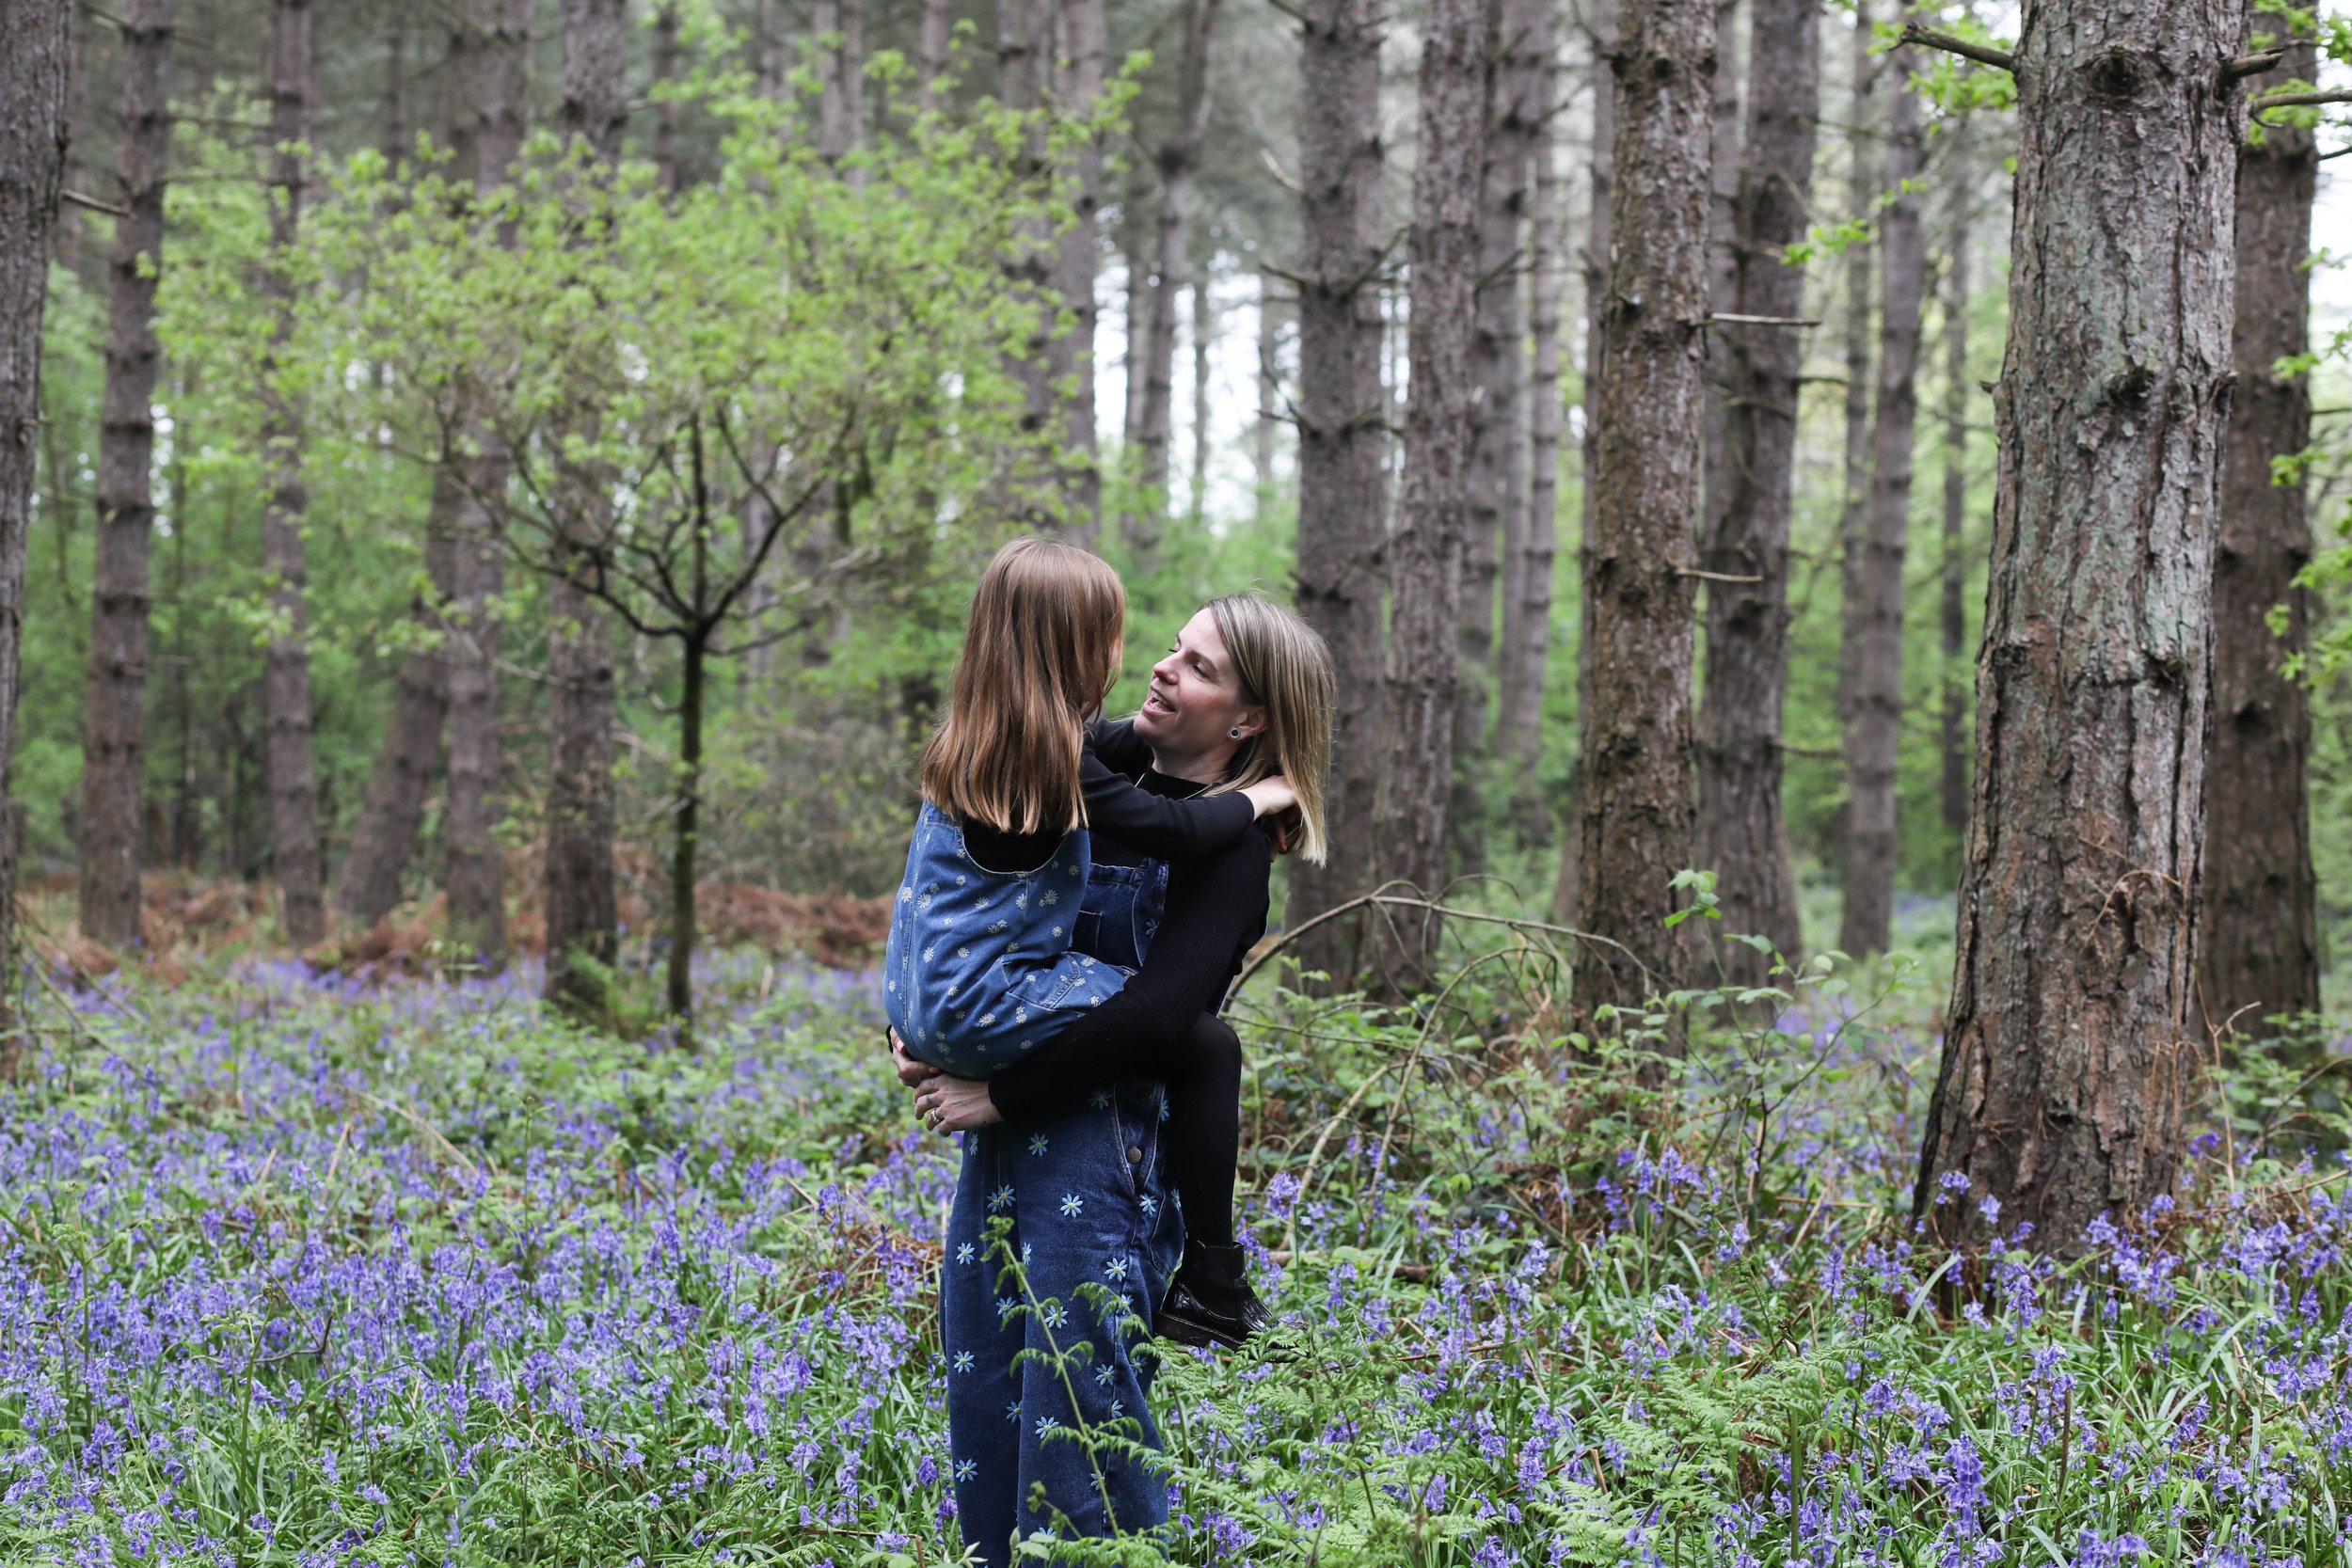 MUM AND DAUGHTER PHOTO SHOOT IN THE BLUEBELLS | BERKSHIRE PORTRAIT SHOOTS36 choice .JPG